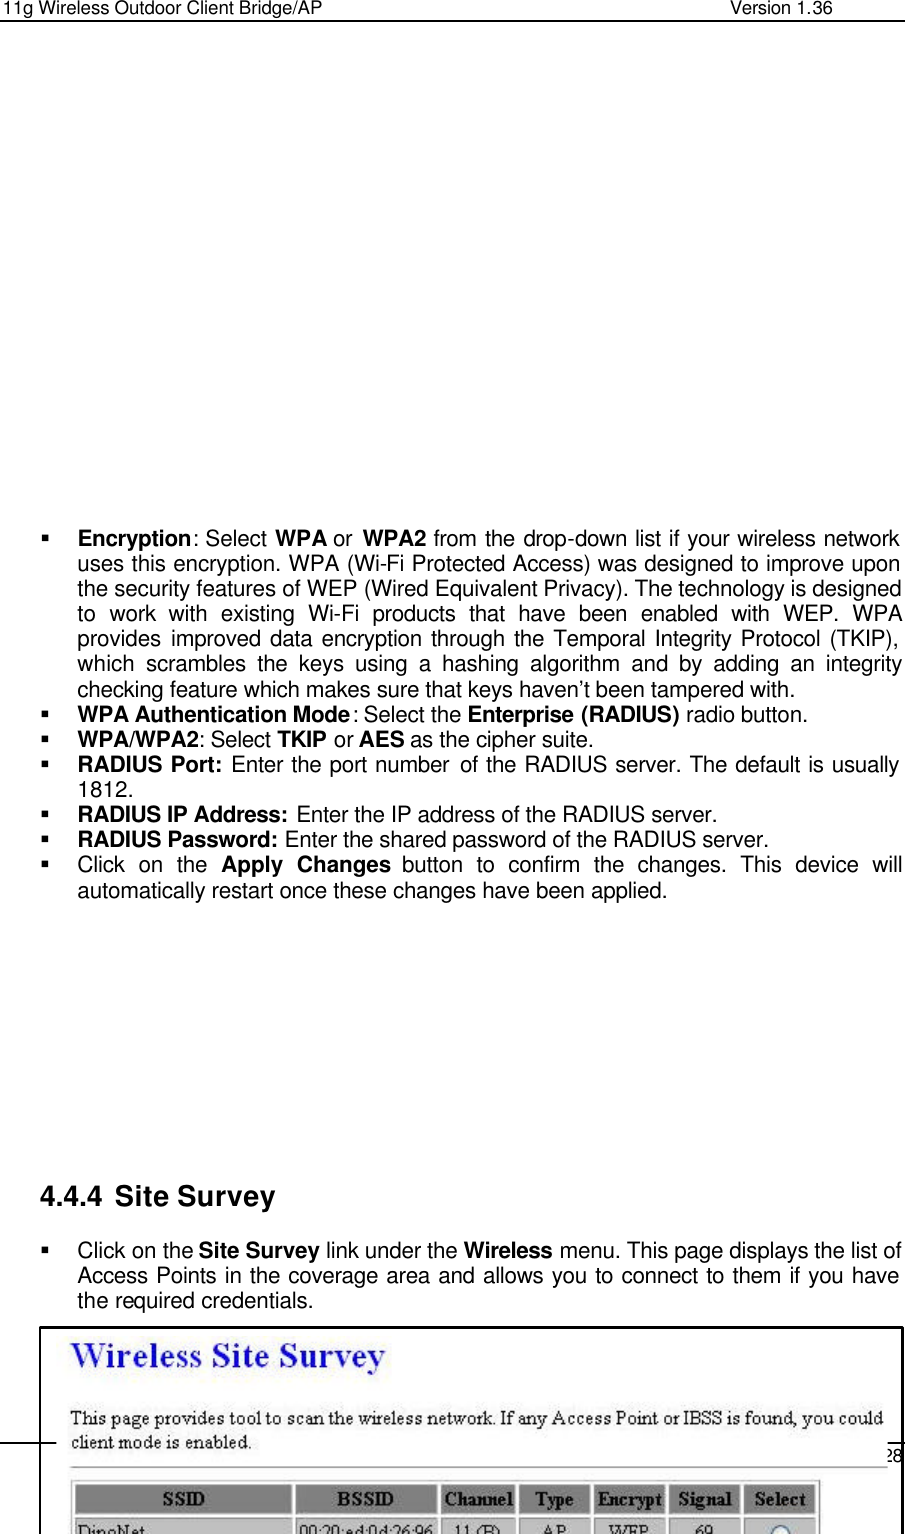 11g Wireless Outdoor Client Bridge/AP                Version 1.36    28                    § Encryption: Select WPA or  WPA2 from the drop-down list if your wireless network uses this encryption. WPA (Wi-Fi Protected Access) was designed to improve upon the security features of WEP (Wired Equivalent Privacy). The technology is designed to work with existing Wi-Fi products that have been enabled with WEP. WPA provides improved data encryption through the Temporal Integrity Protocol (TKIP), which scrambles the keys using a hashing algorithm and by adding an integrity checking feature which makes sure that keys haven’t been tampered with.  § WPA Authentication Mode: Select the Enterprise (RADIUS) radio button.  § WPA/WPA2: Select TKIP or AES as the cipher suite.  § RADIUS Port: Enter the port number of the RADIUS server. The default is usually 1812. § RADIUS IP Address: Enter the IP address of the RADIUS server.  § RADIUS Password: Enter the shared password of the RADIUS server.  § Click on the Apply Changes button to confirm the changes. This device will automatically restart once these changes have been applied.             4.4.4 Site Survey § Click on the Site Survey link under the Wireless menu. This page displays the list of Access Points in the coverage area and allows you to connect to them if you have the required credentials.      